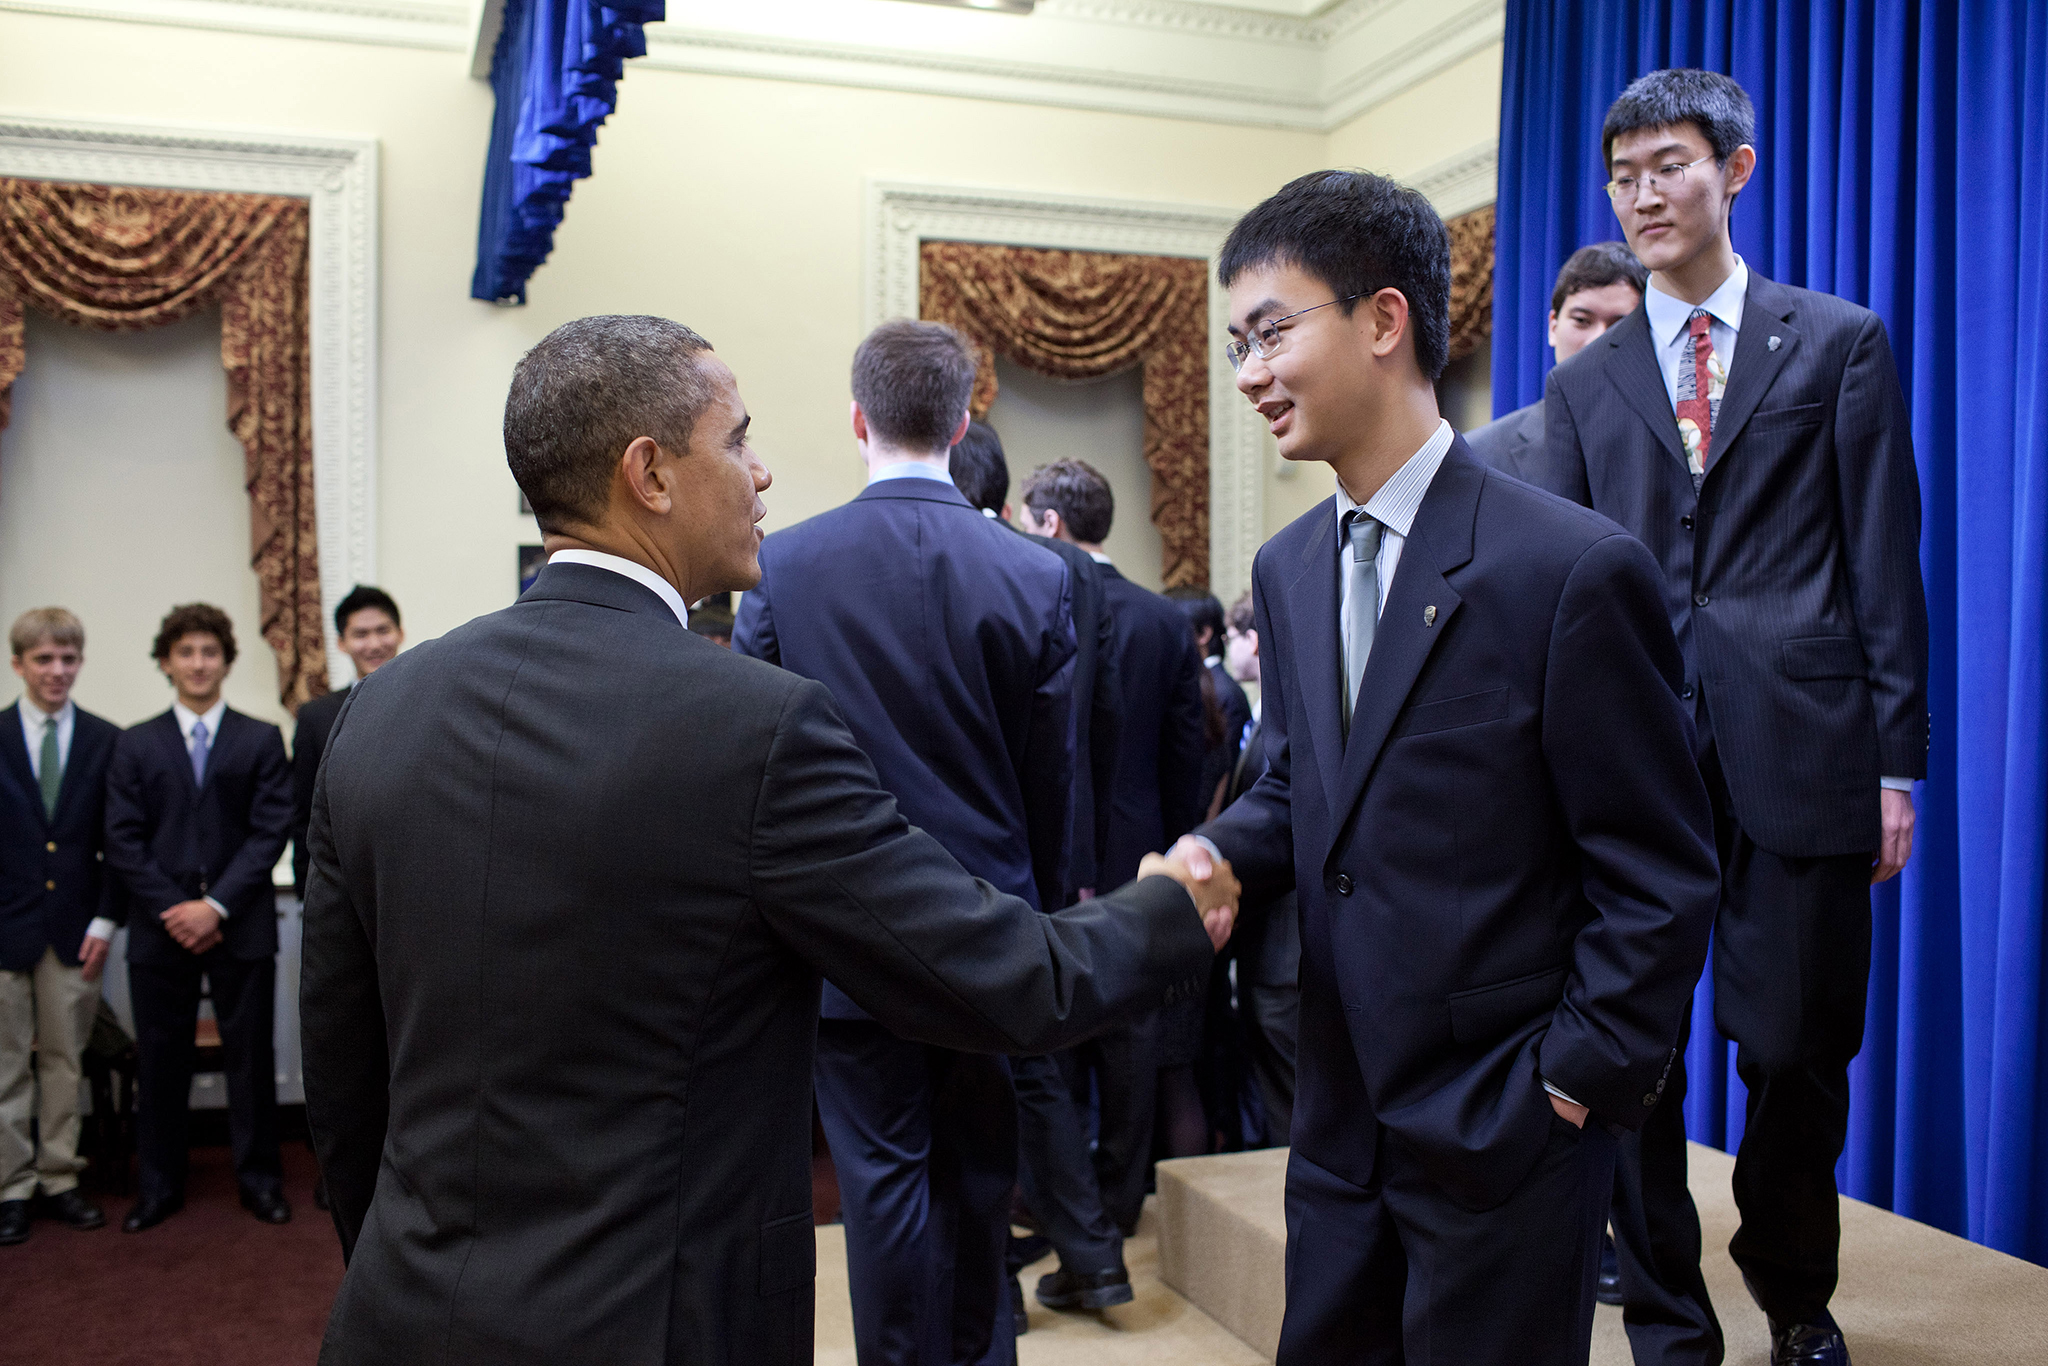 President Obama greets STS finalist Xiaoyu He at the White House